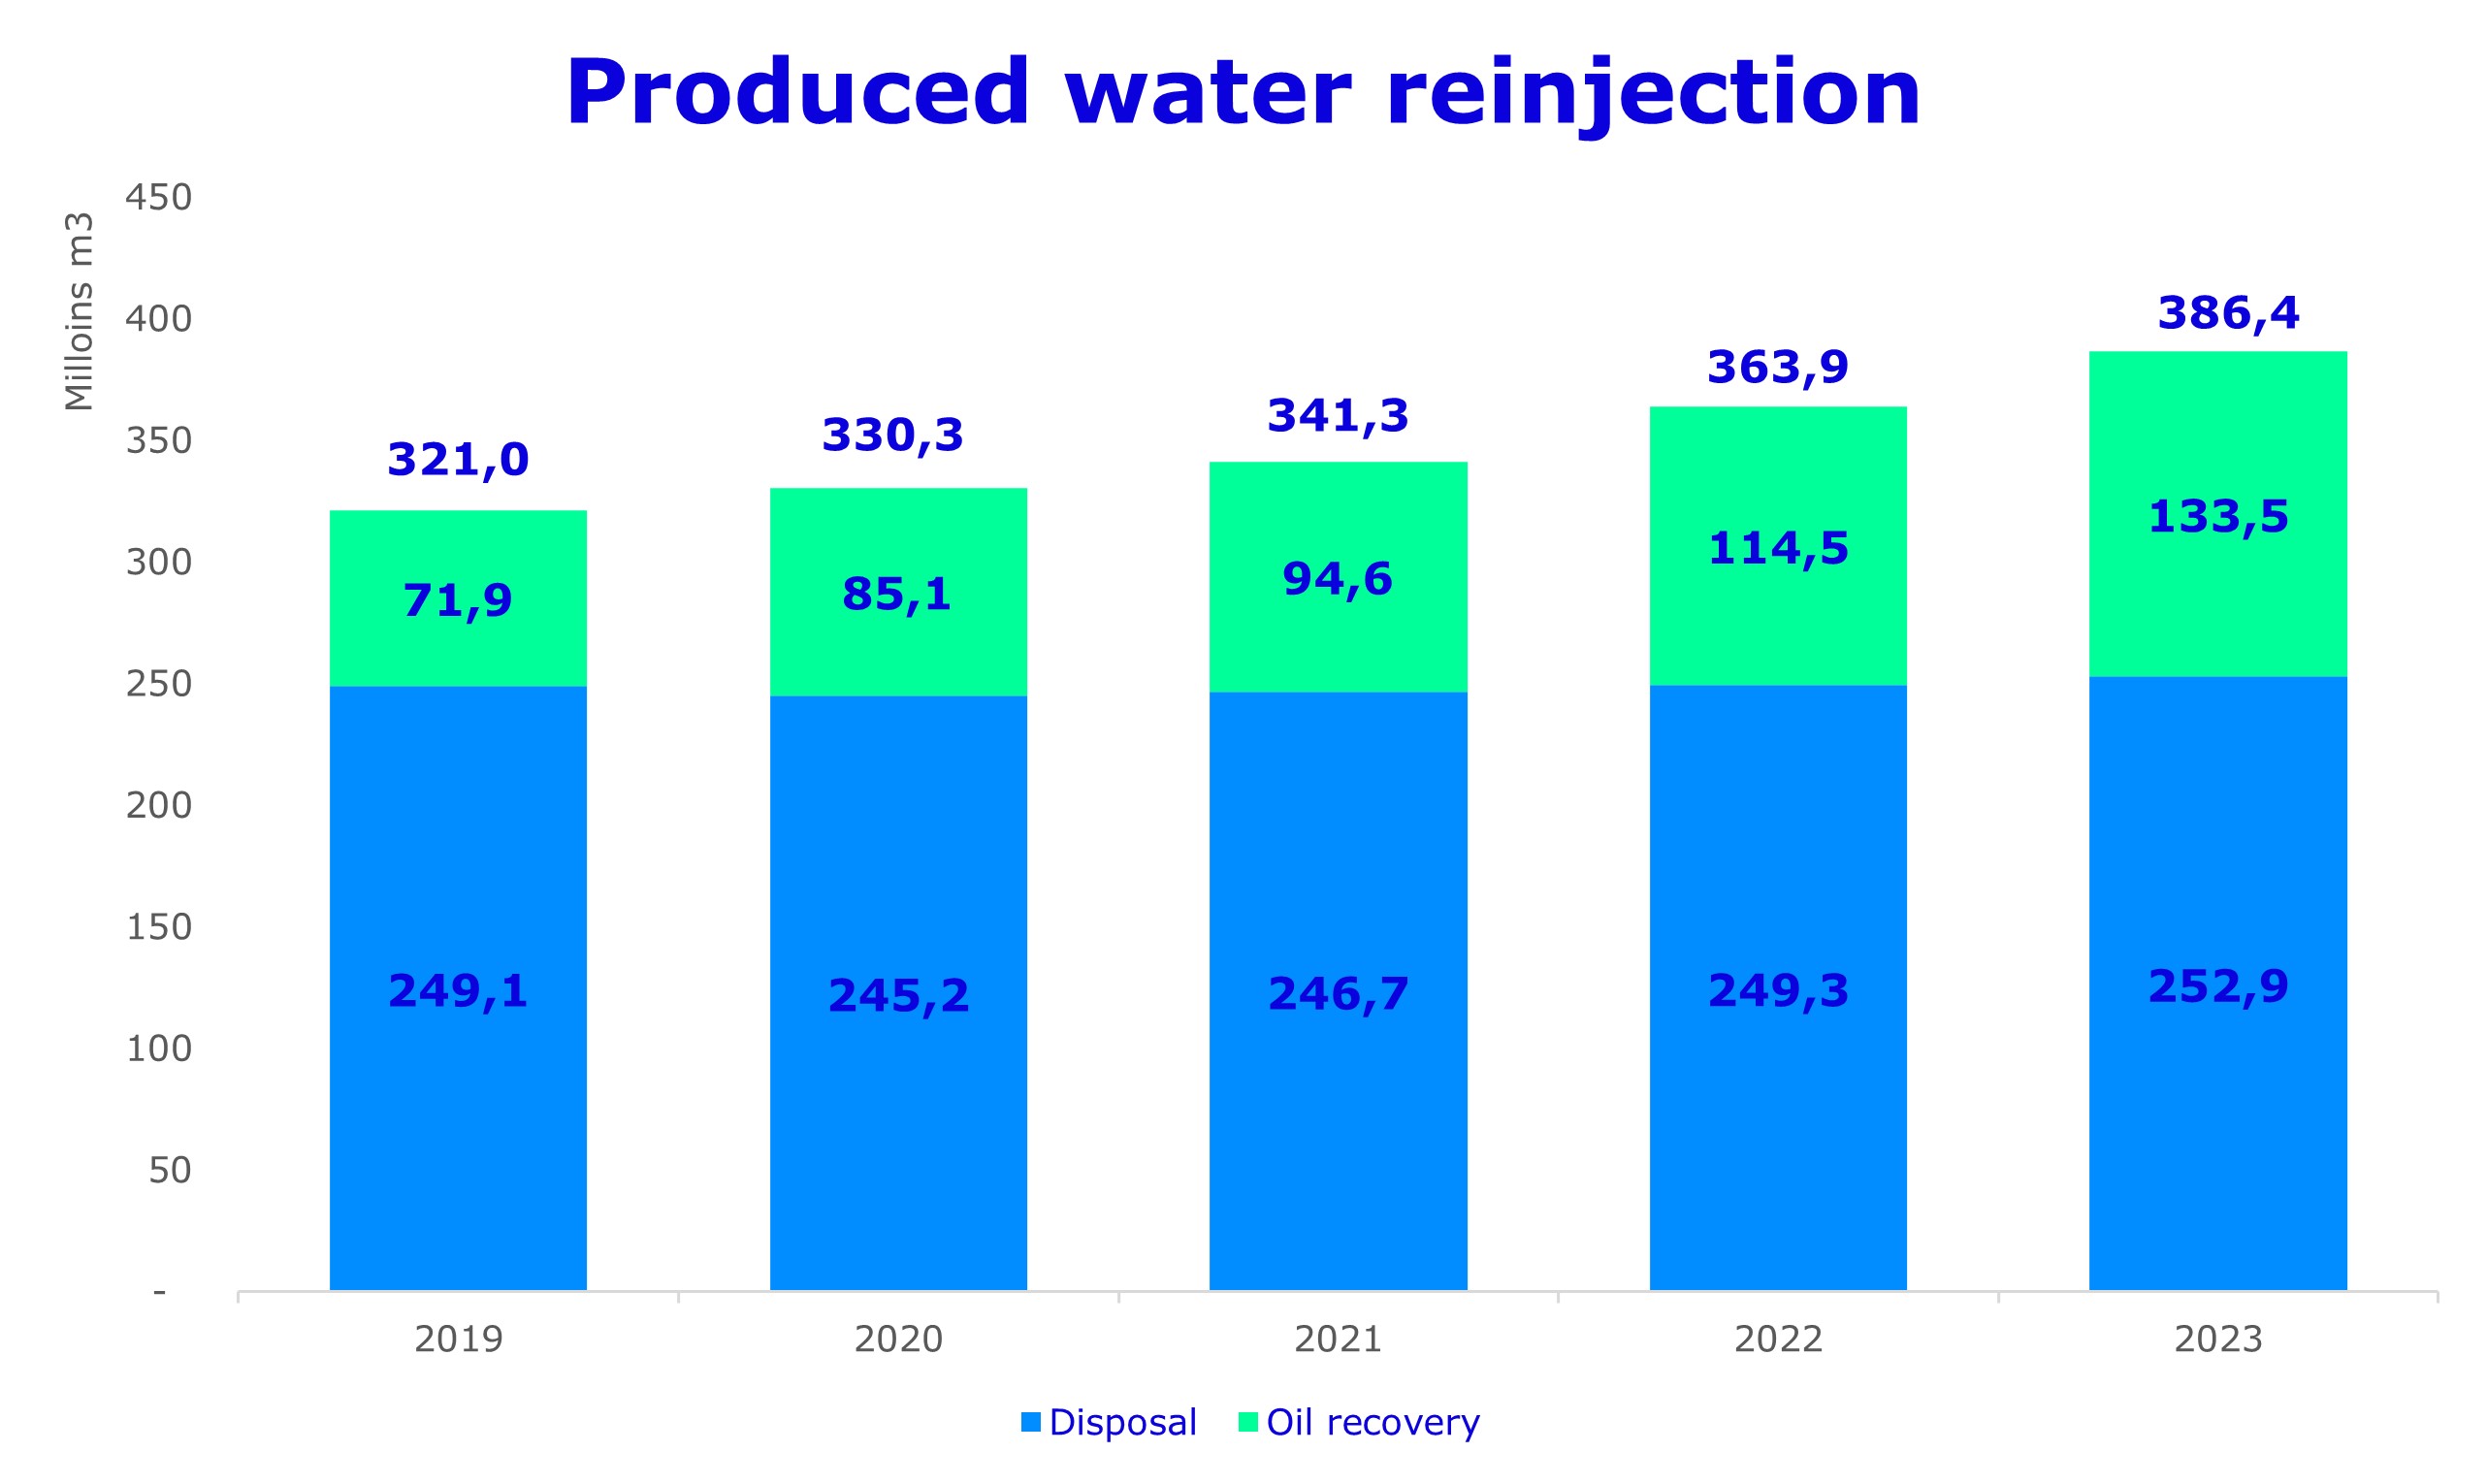 Produced water reinjection